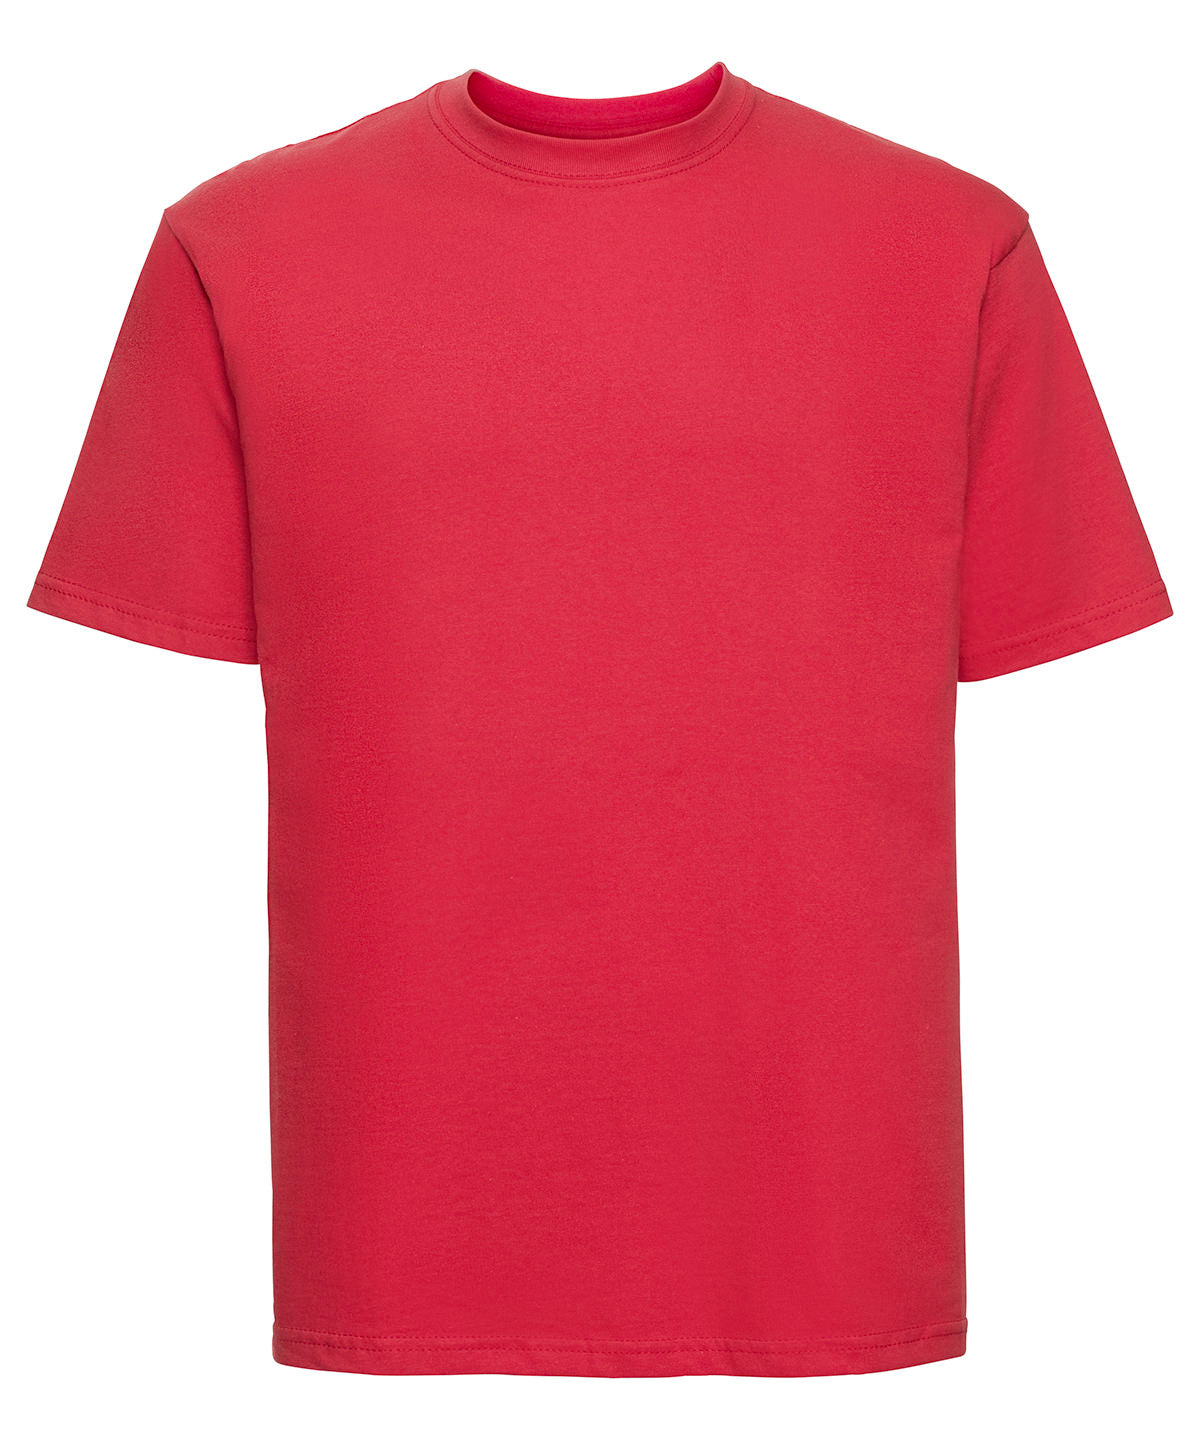 Russell Super Ringspun Classic T-Shirt Bright Red